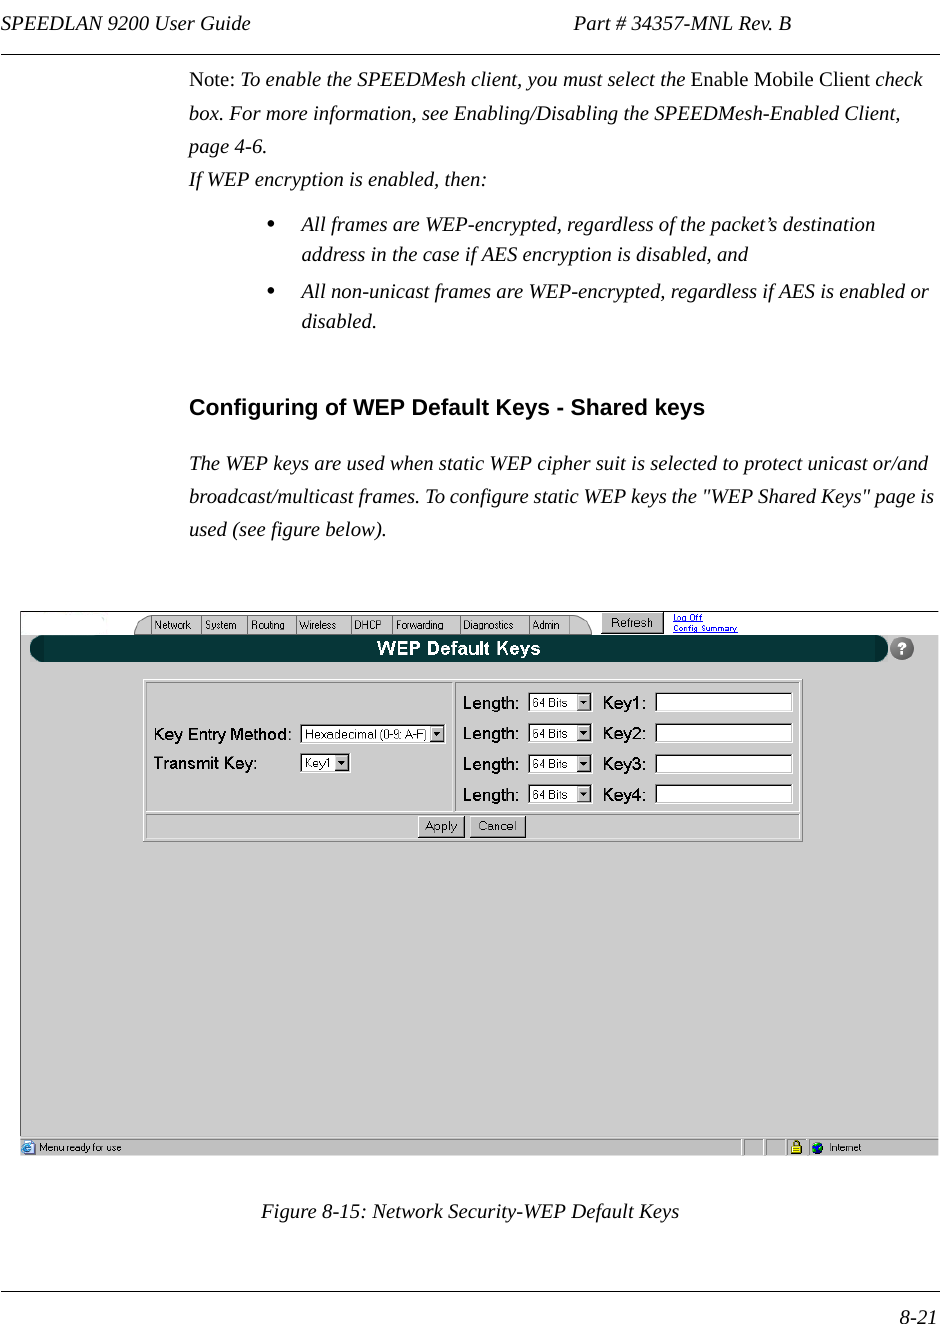 SPEEDLAN 9200 User Guide                                                              Part # 34357-MNL Rev. B      8-21                                                                                                                                                              Note: To enable the SPEEDMesh client, you must select the Enable Mobile Client check box. For more information, see Enabling/Disabling the SPEEDMesh-Enabled Client, page 4-6.If WEP encryption is enabled, then:•All frames are WEP-encrypted, regardless of the packet’s destination address in the case if AES encryption is disabled, and•All non-unicast frames are WEP-encrypted, regardless if AES is enabled or disabled. Configuring of WEP Default Keys - Shared keysThe WEP keys are used when static WEP cipher suit is selected to protect unicast or/and broadcast/multicast frames. To configure static WEP keys the &quot;WEP Shared Keys&quot; page is used (see figure below).Figure 8-15: Network Security-WEP Default Keys